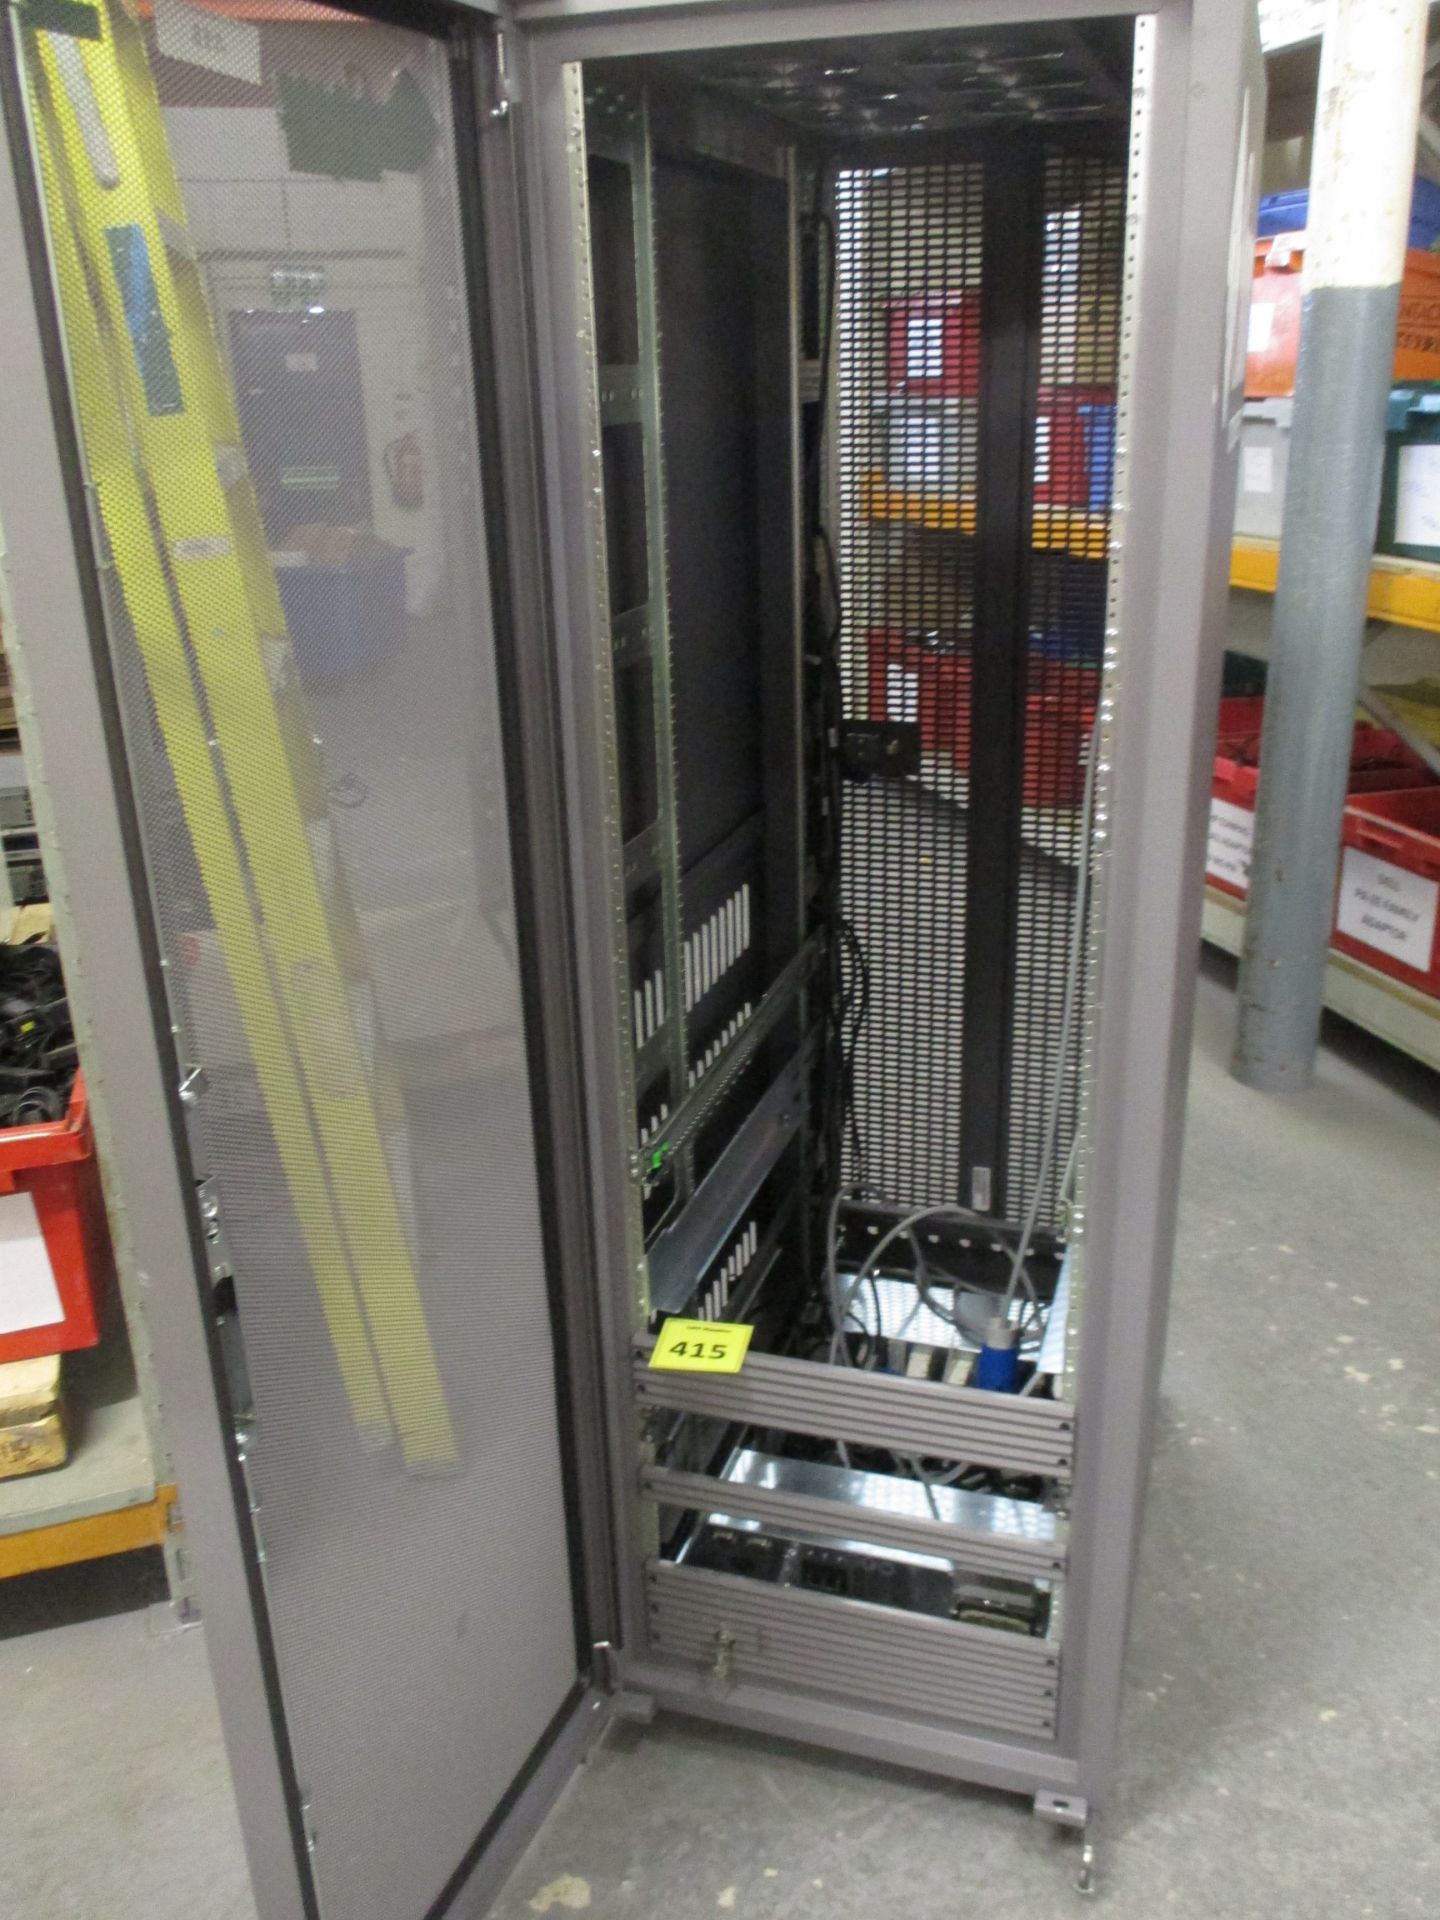 SUN STOREDGE 38U RACKMOUNT SERVER CABINET ON WHEELS IN EXCEPTIONALLY CLEAN CONDITION. With PDU's, - Image 4 of 6